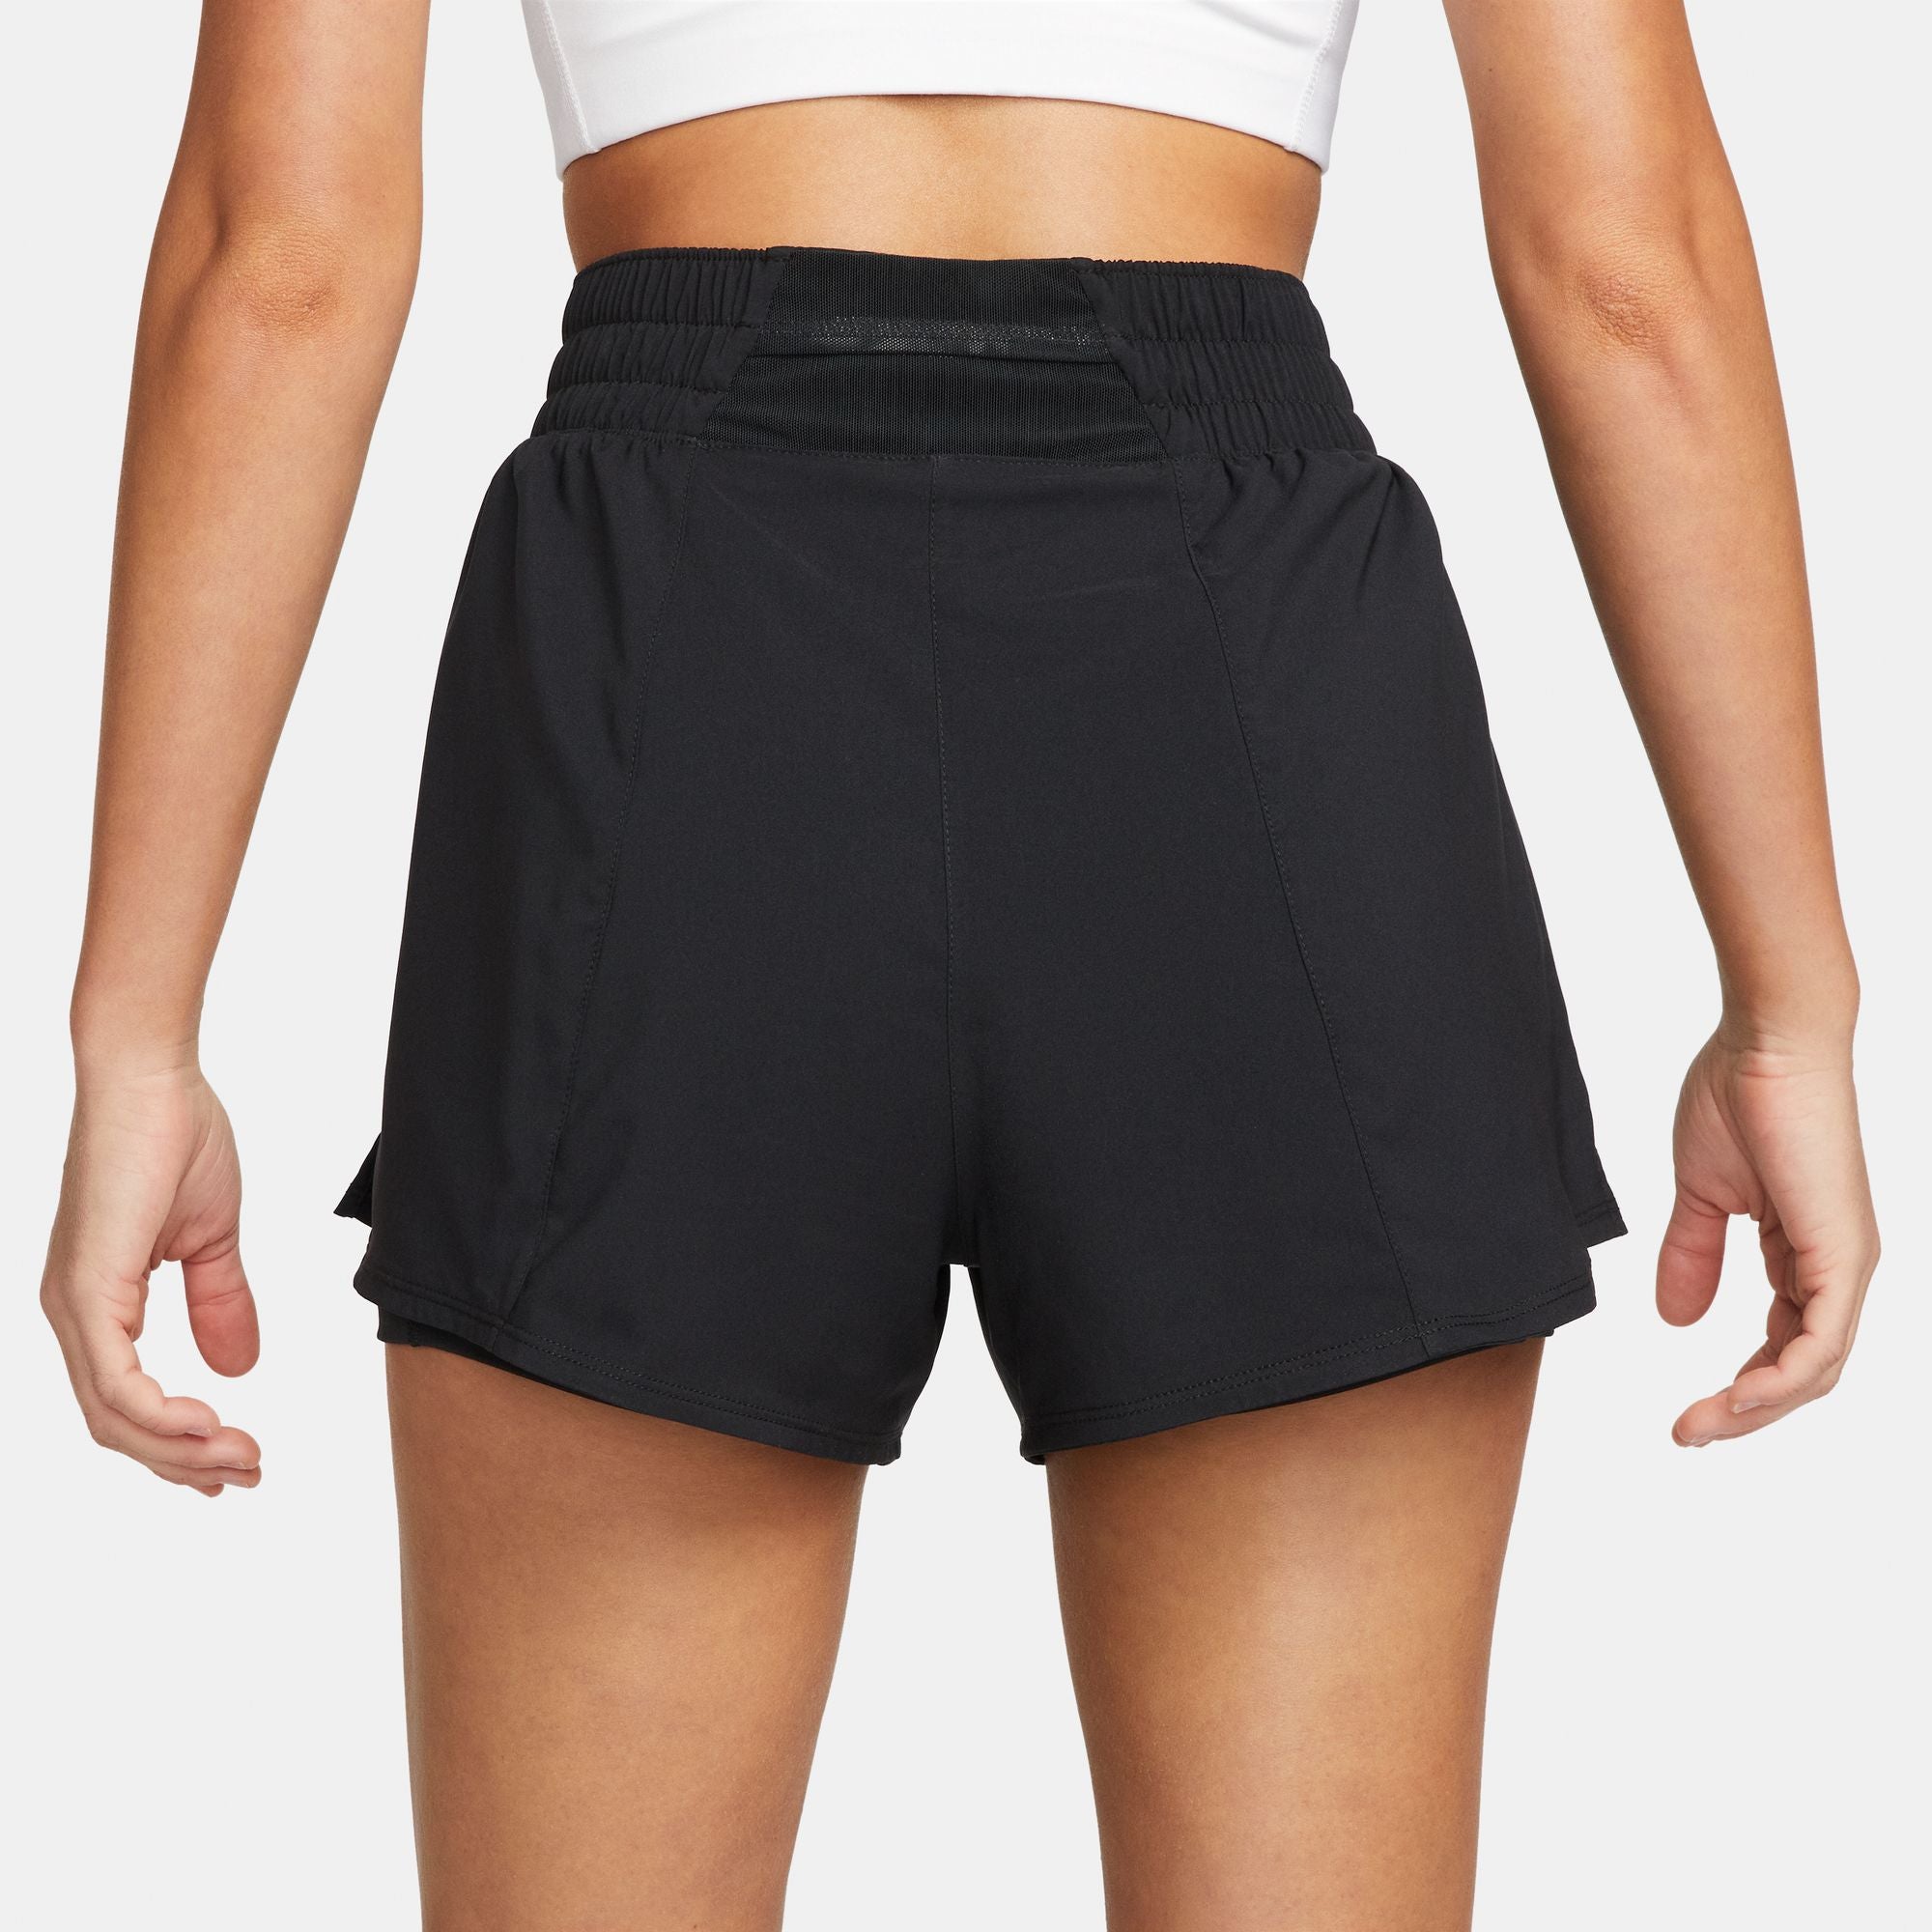 back view of womens 2N1 short